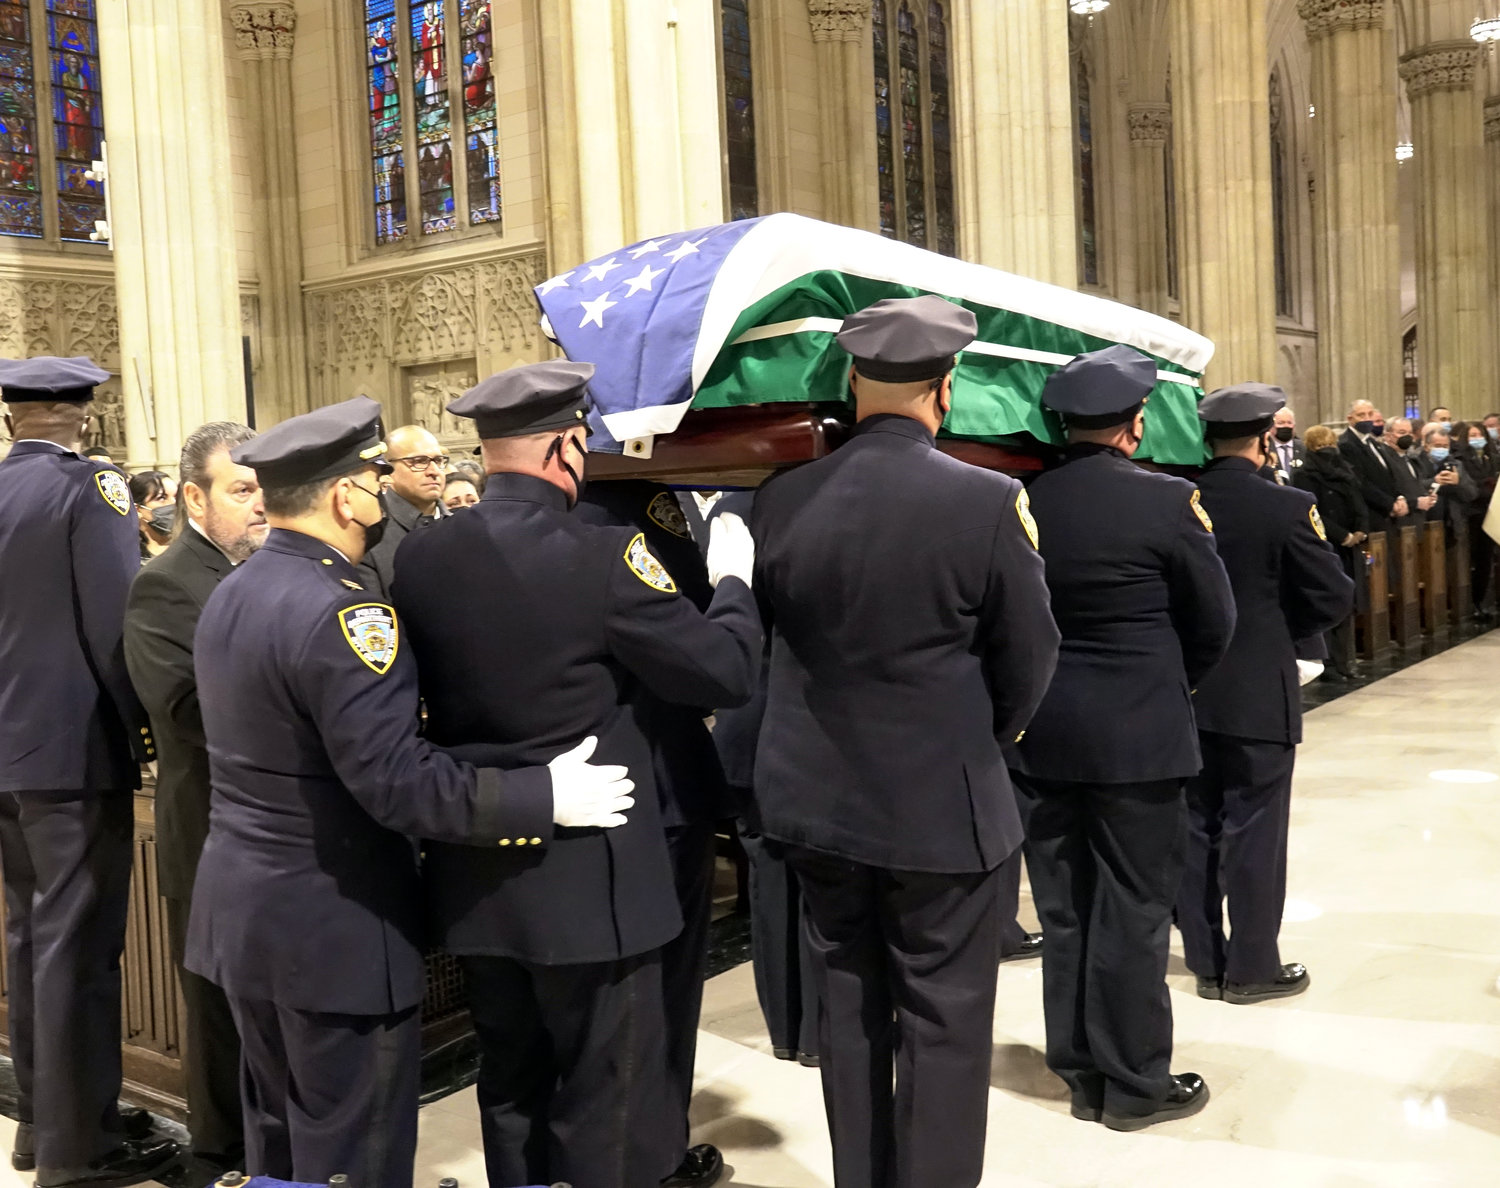 Officers carry the casket from the cathedral after the Funeral Mass.